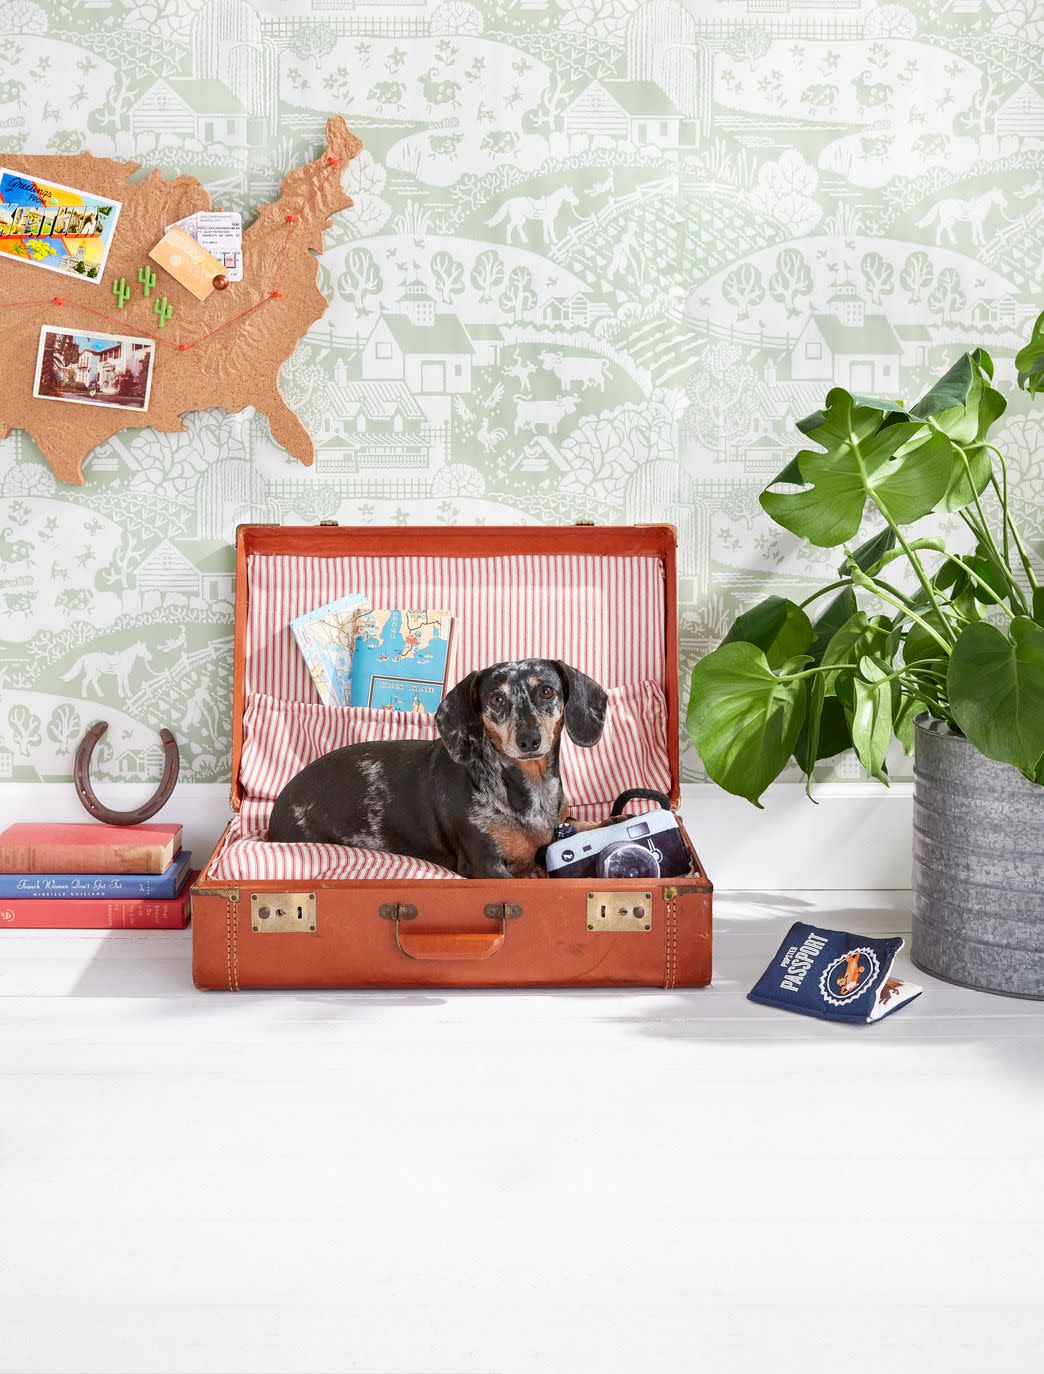 emma the dachshund in her easy pack bed with camera and passport chew toys petplaycom